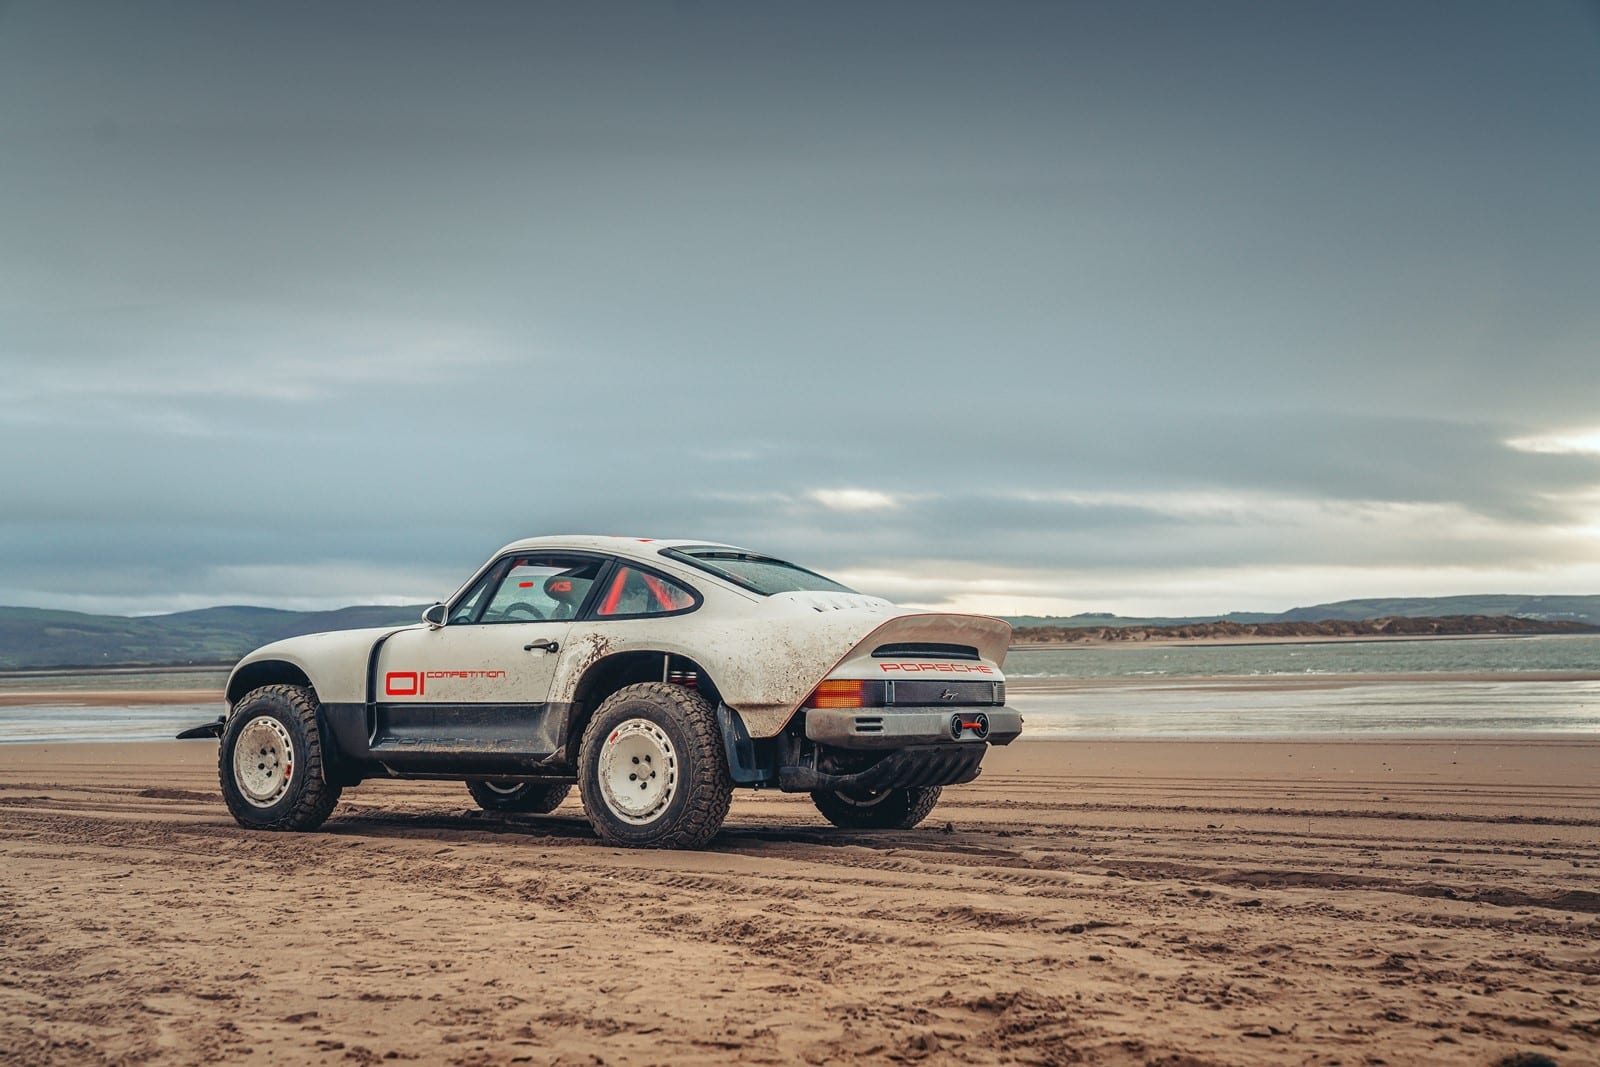 How about this 1990 Porsche 911 Reimagined by Singer?